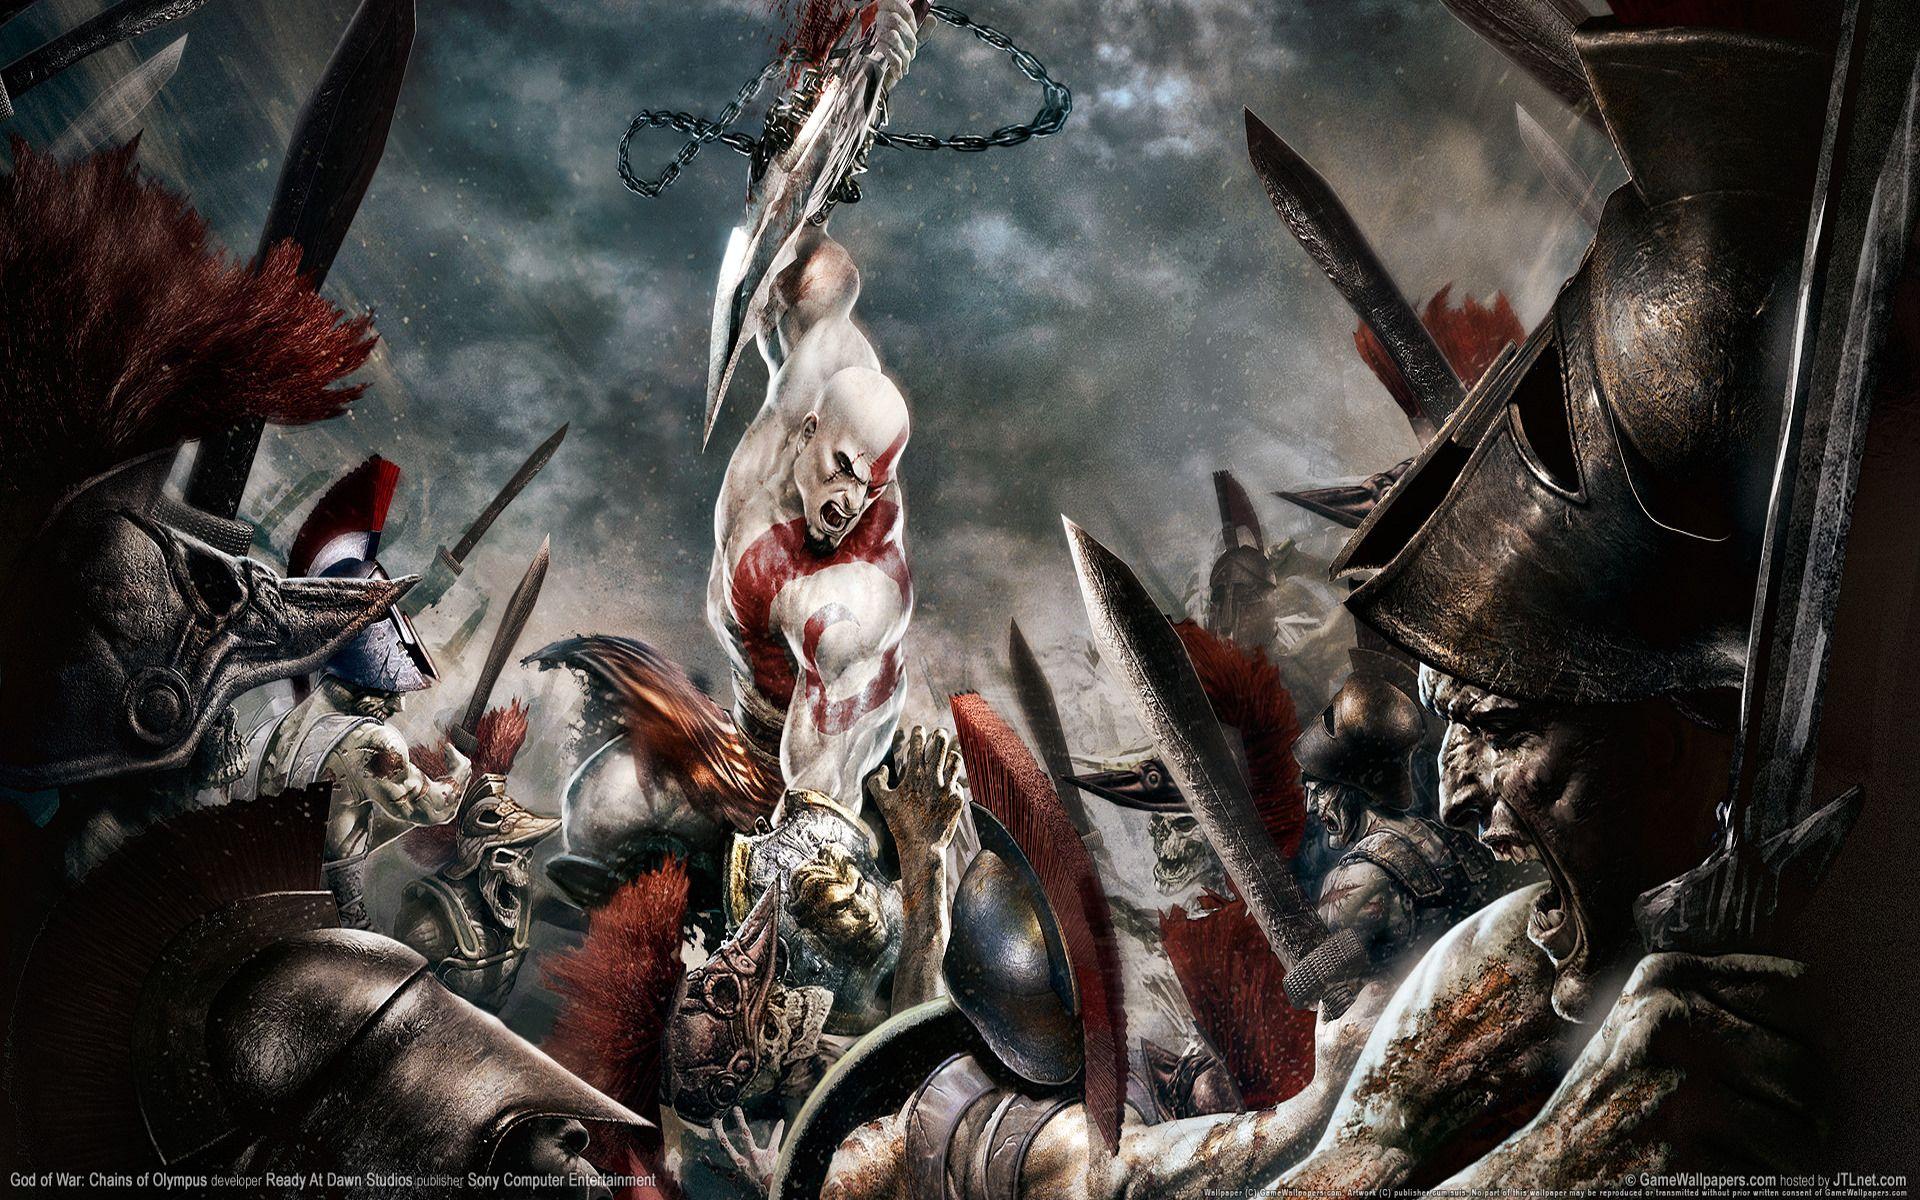 God of War: Chains of Olympus wallpaper. God of War: Chains of Olympus